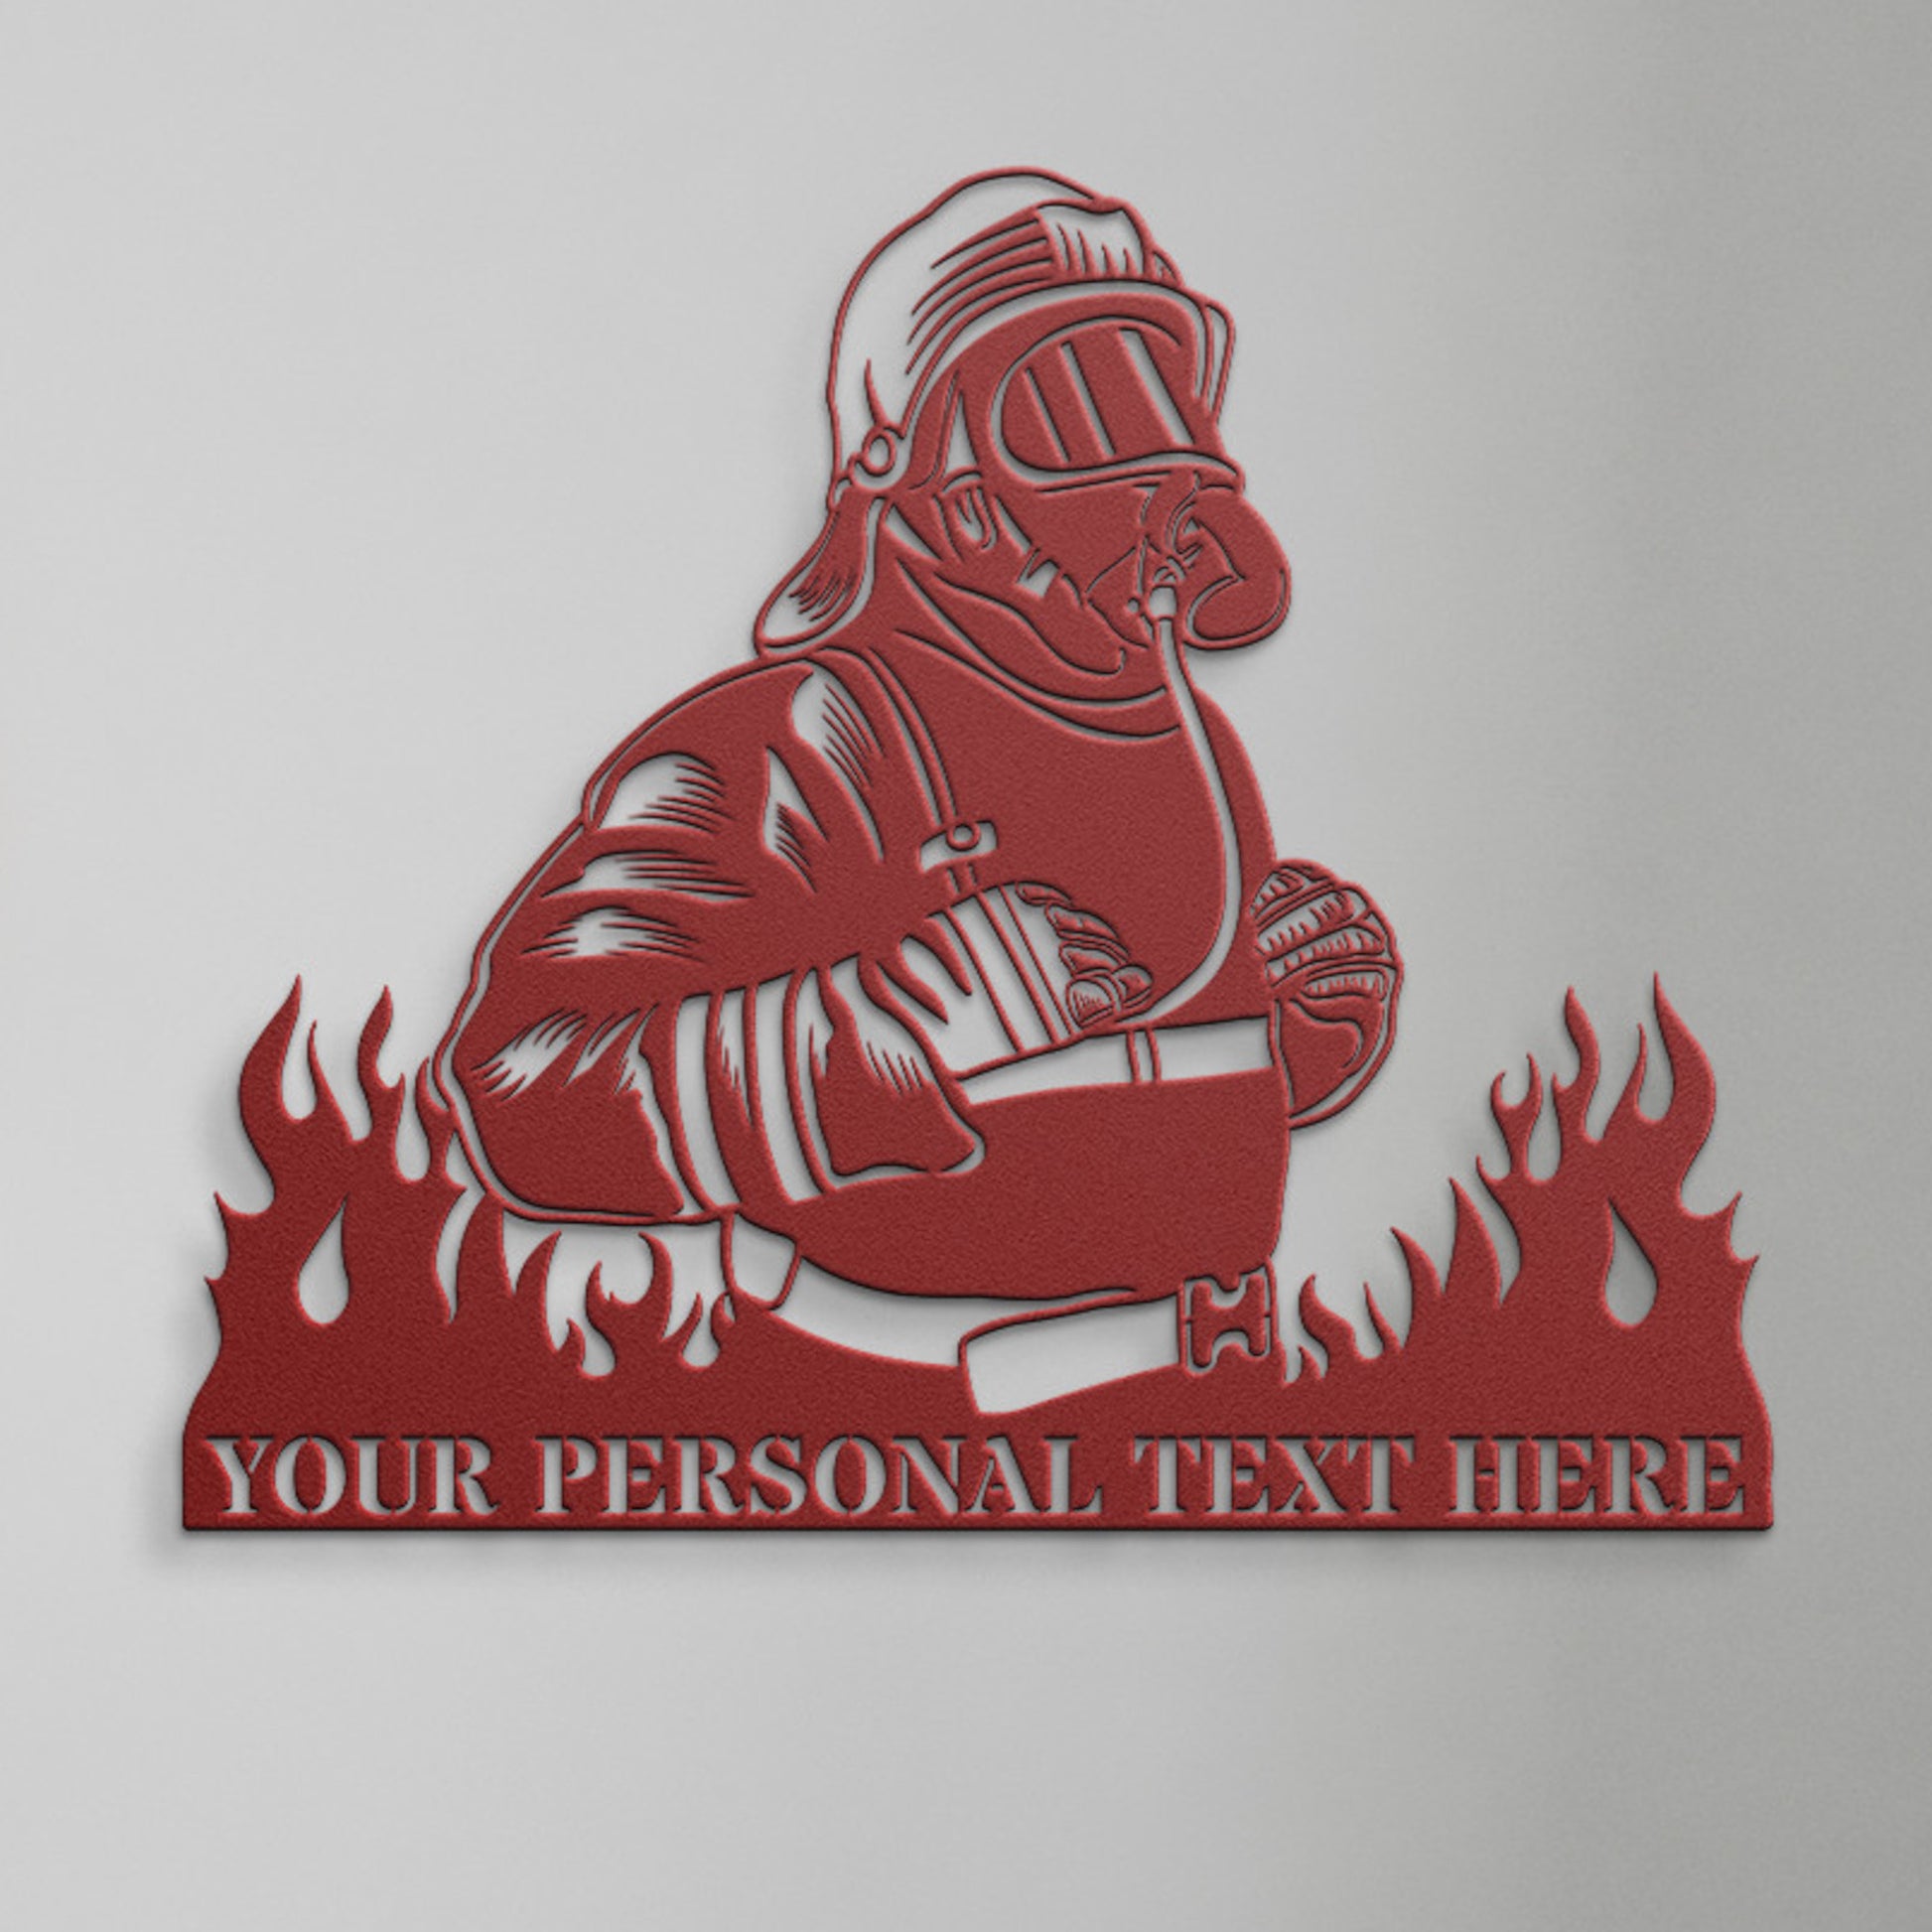 Personalized Fireman Metal Sign Gift. Custom Firefighter Wall Decor. First Responder Wall Decor, Firefighter Display Gift. Fire And Rescue